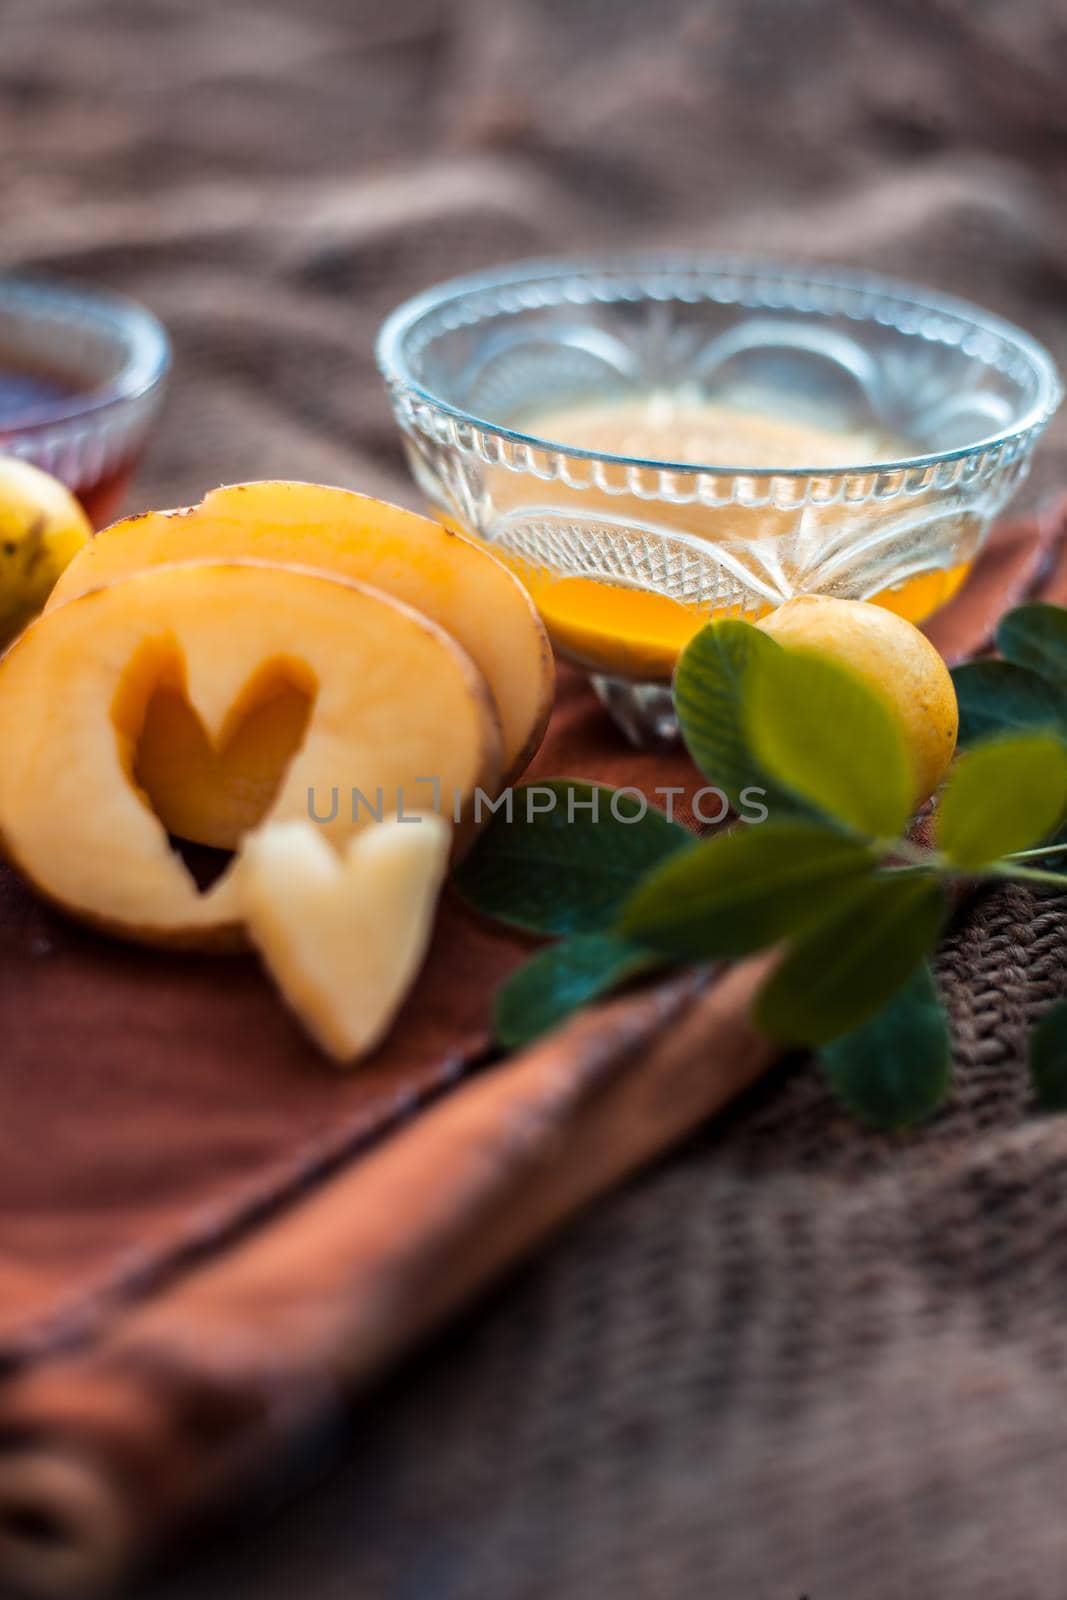 Glowing face mask of potato juice in a glass bowl on brown colored surface along with some lemon juice,potato juice and honey.Horizontal shot. by mirzamlk